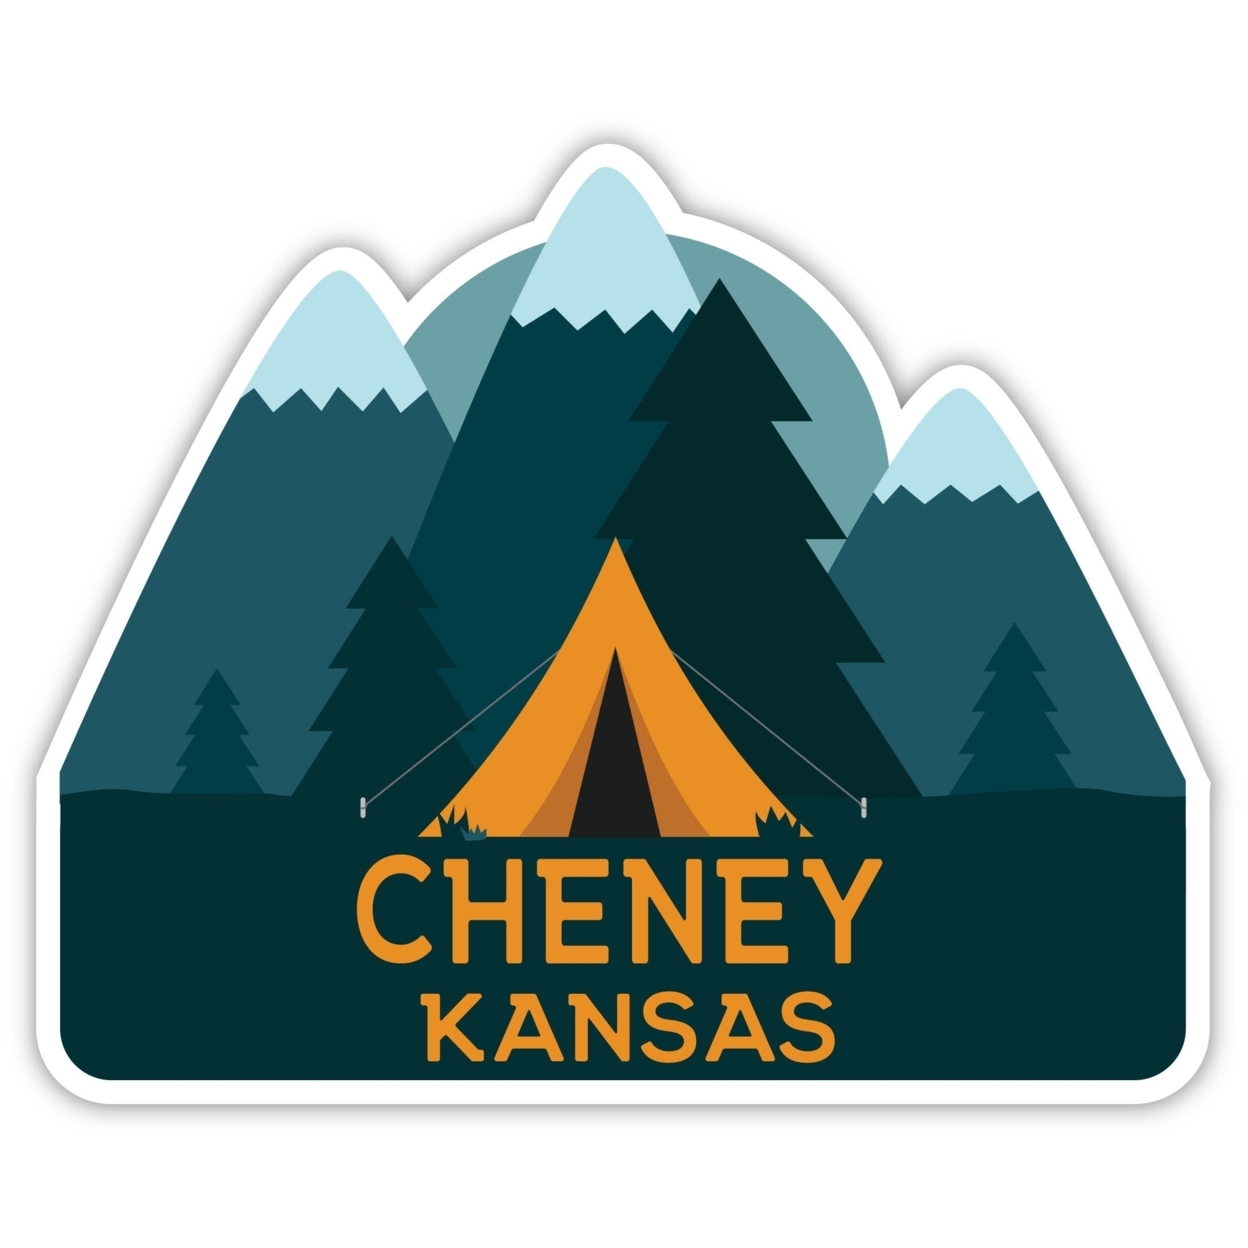 Cheney Kansas Souvenir Decorative Stickers (Choose Theme And Size) - 4-Pack, 10-Inch, Tent